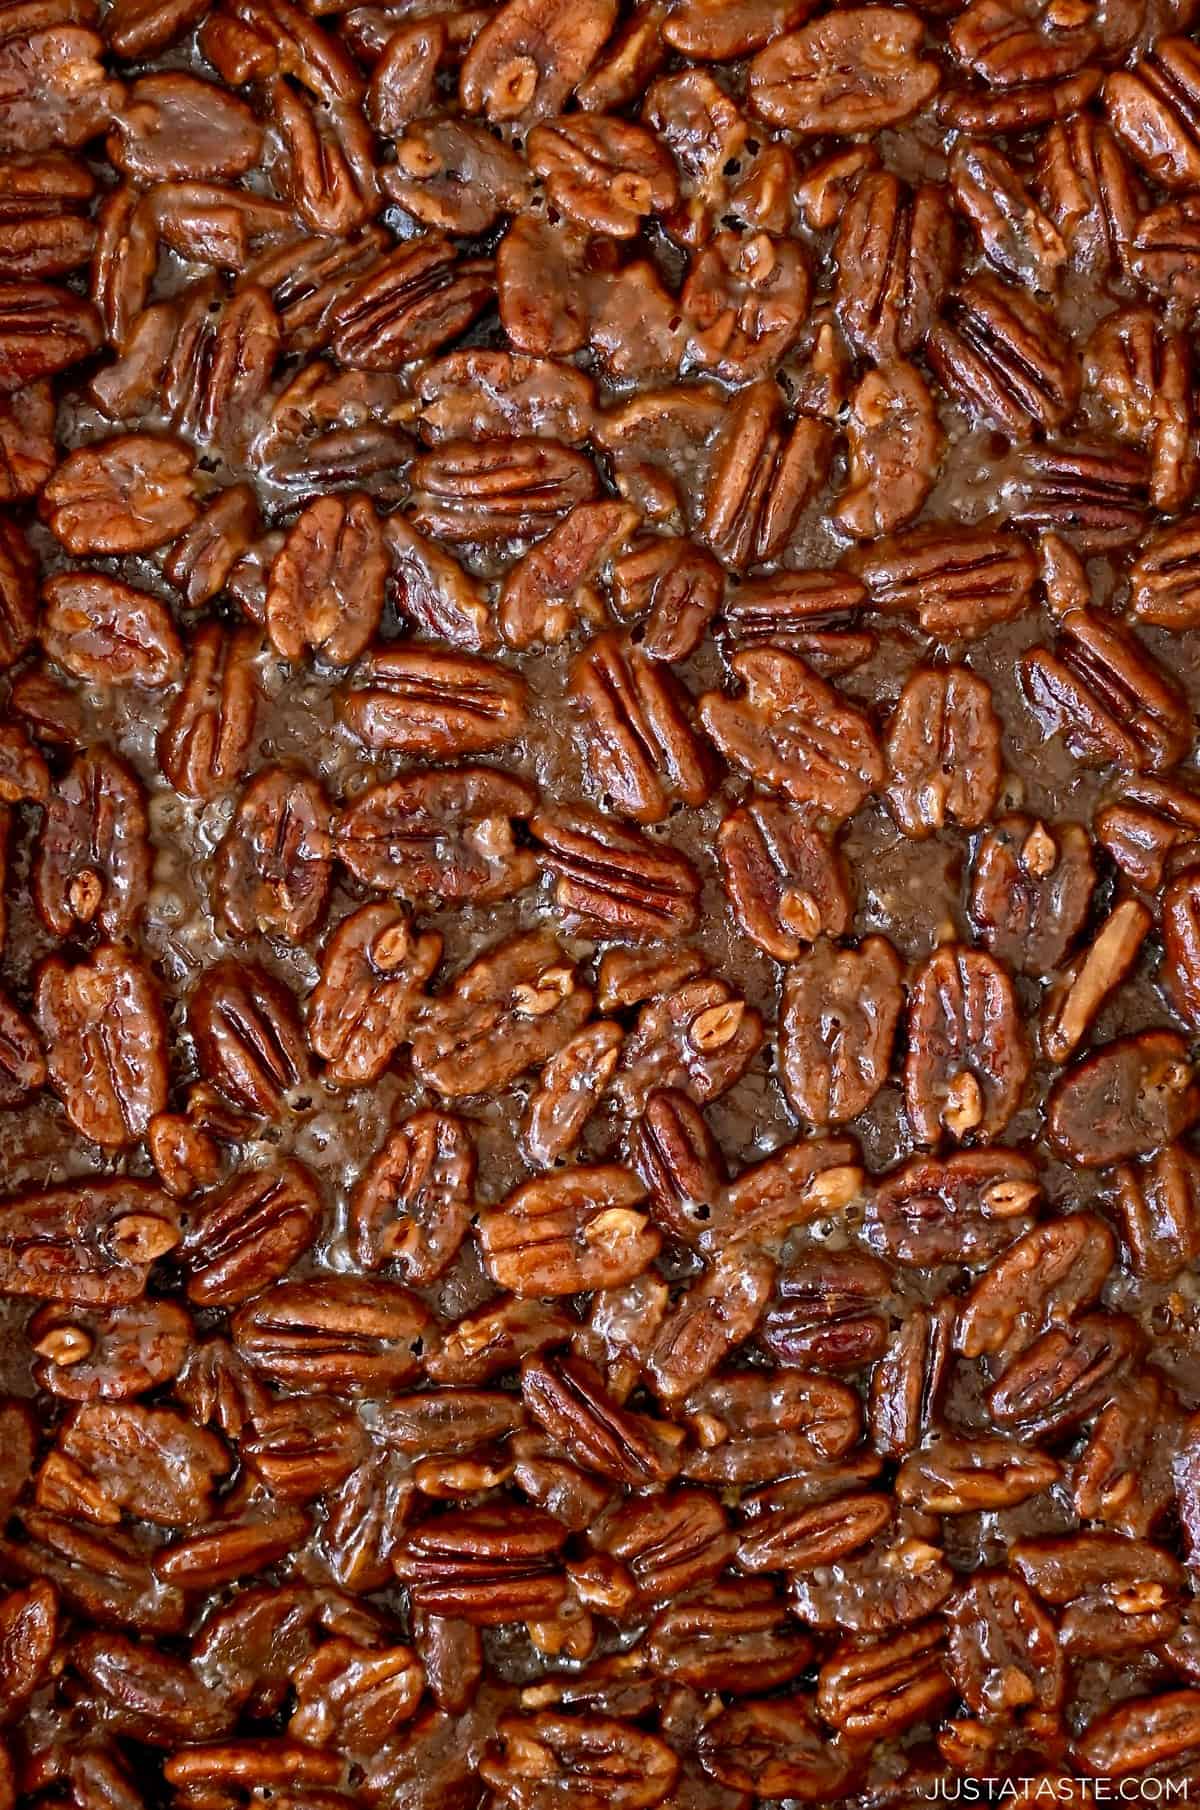 Pecan pie filling made with halved pecans.